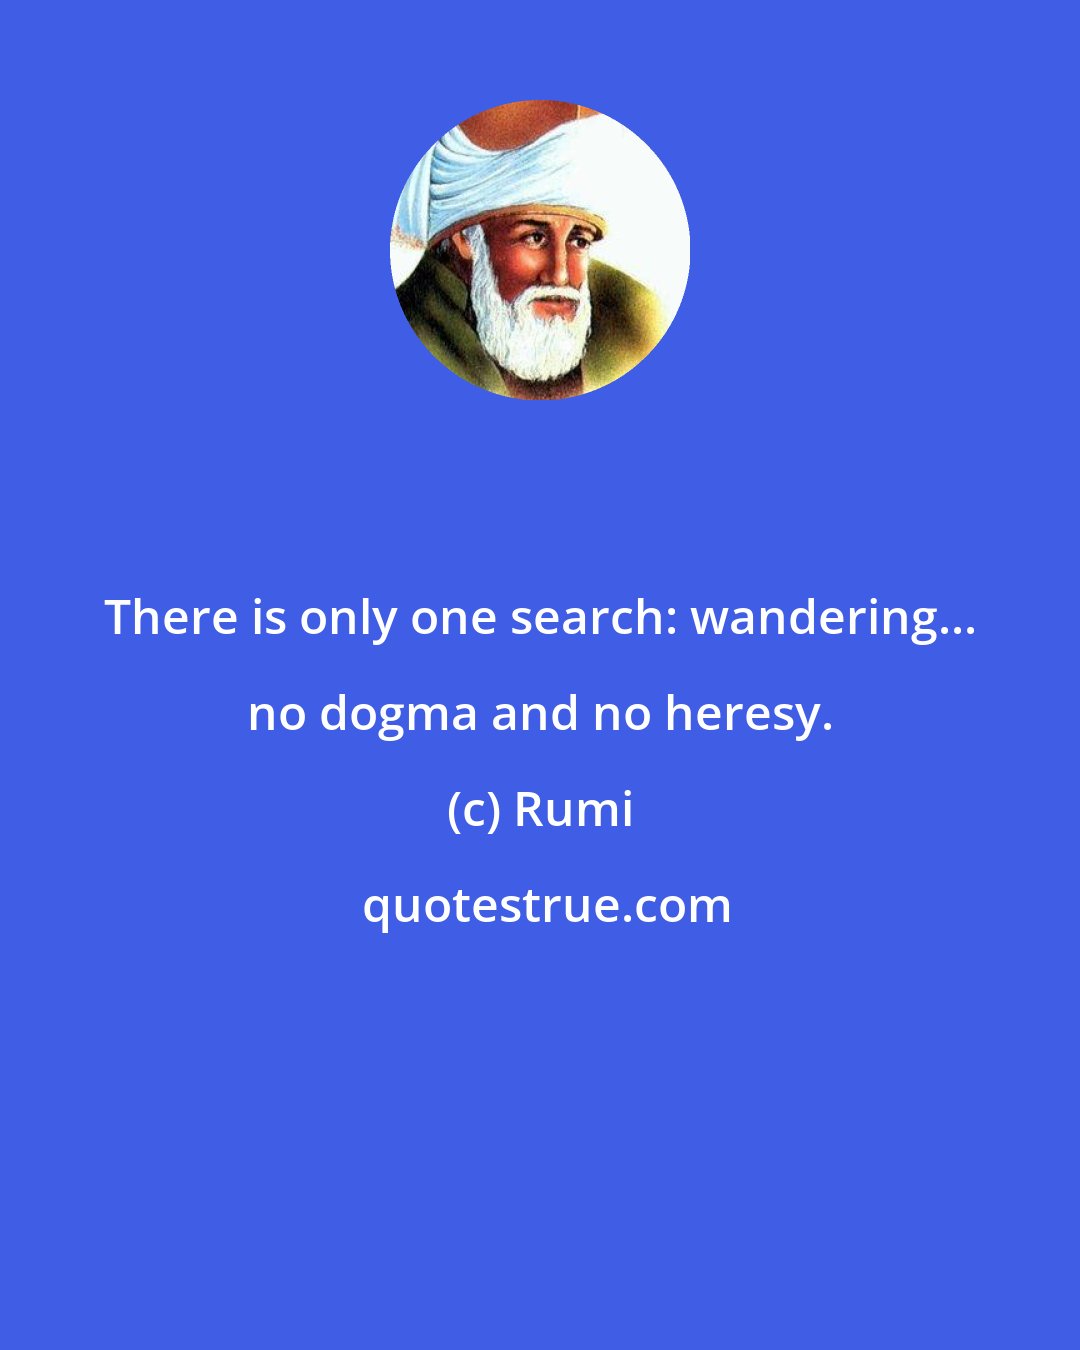 Rumi: There is only one search: wandering... no dogma and no heresy.